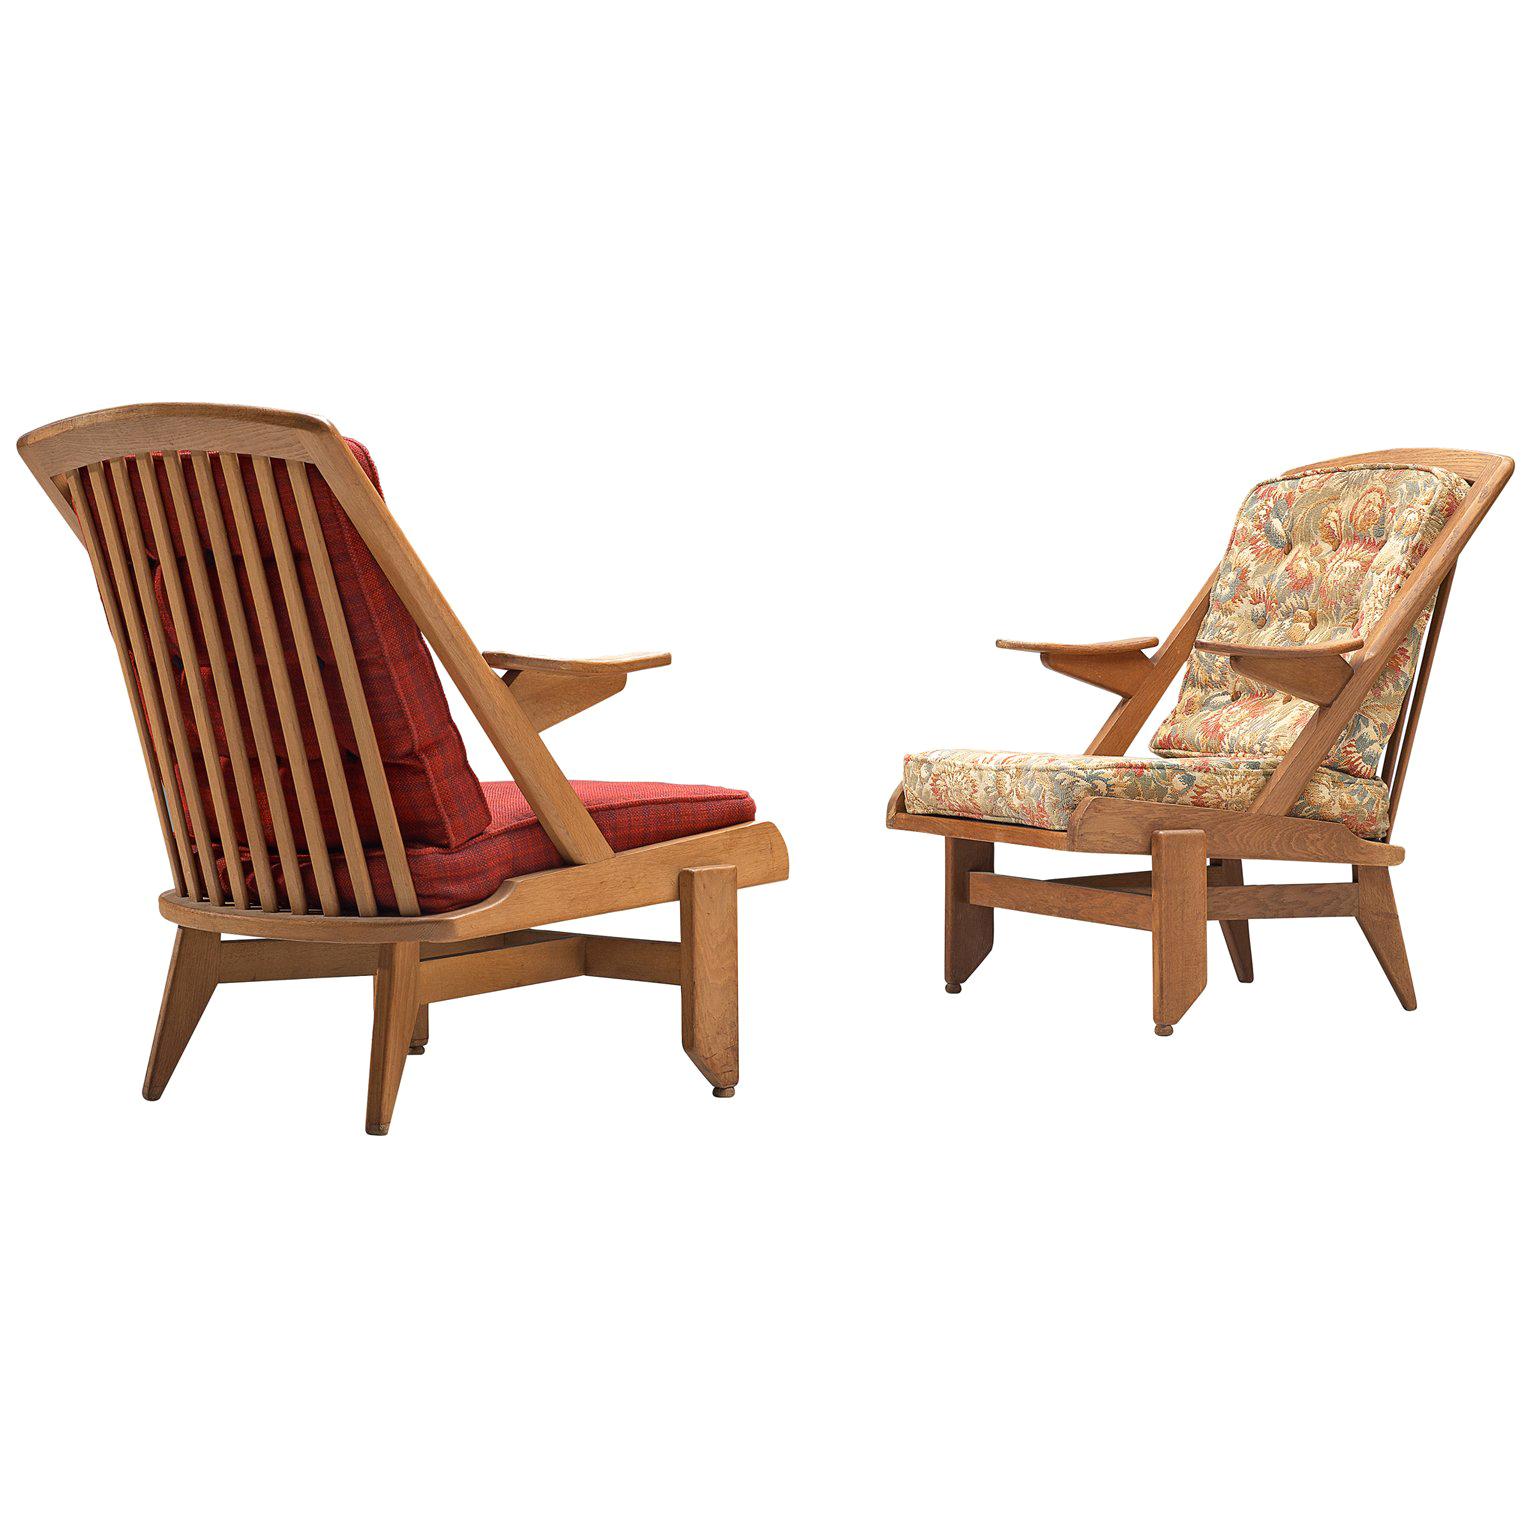 Guillerme and Chambron, Set of Lounge Chairs, France, 1950s